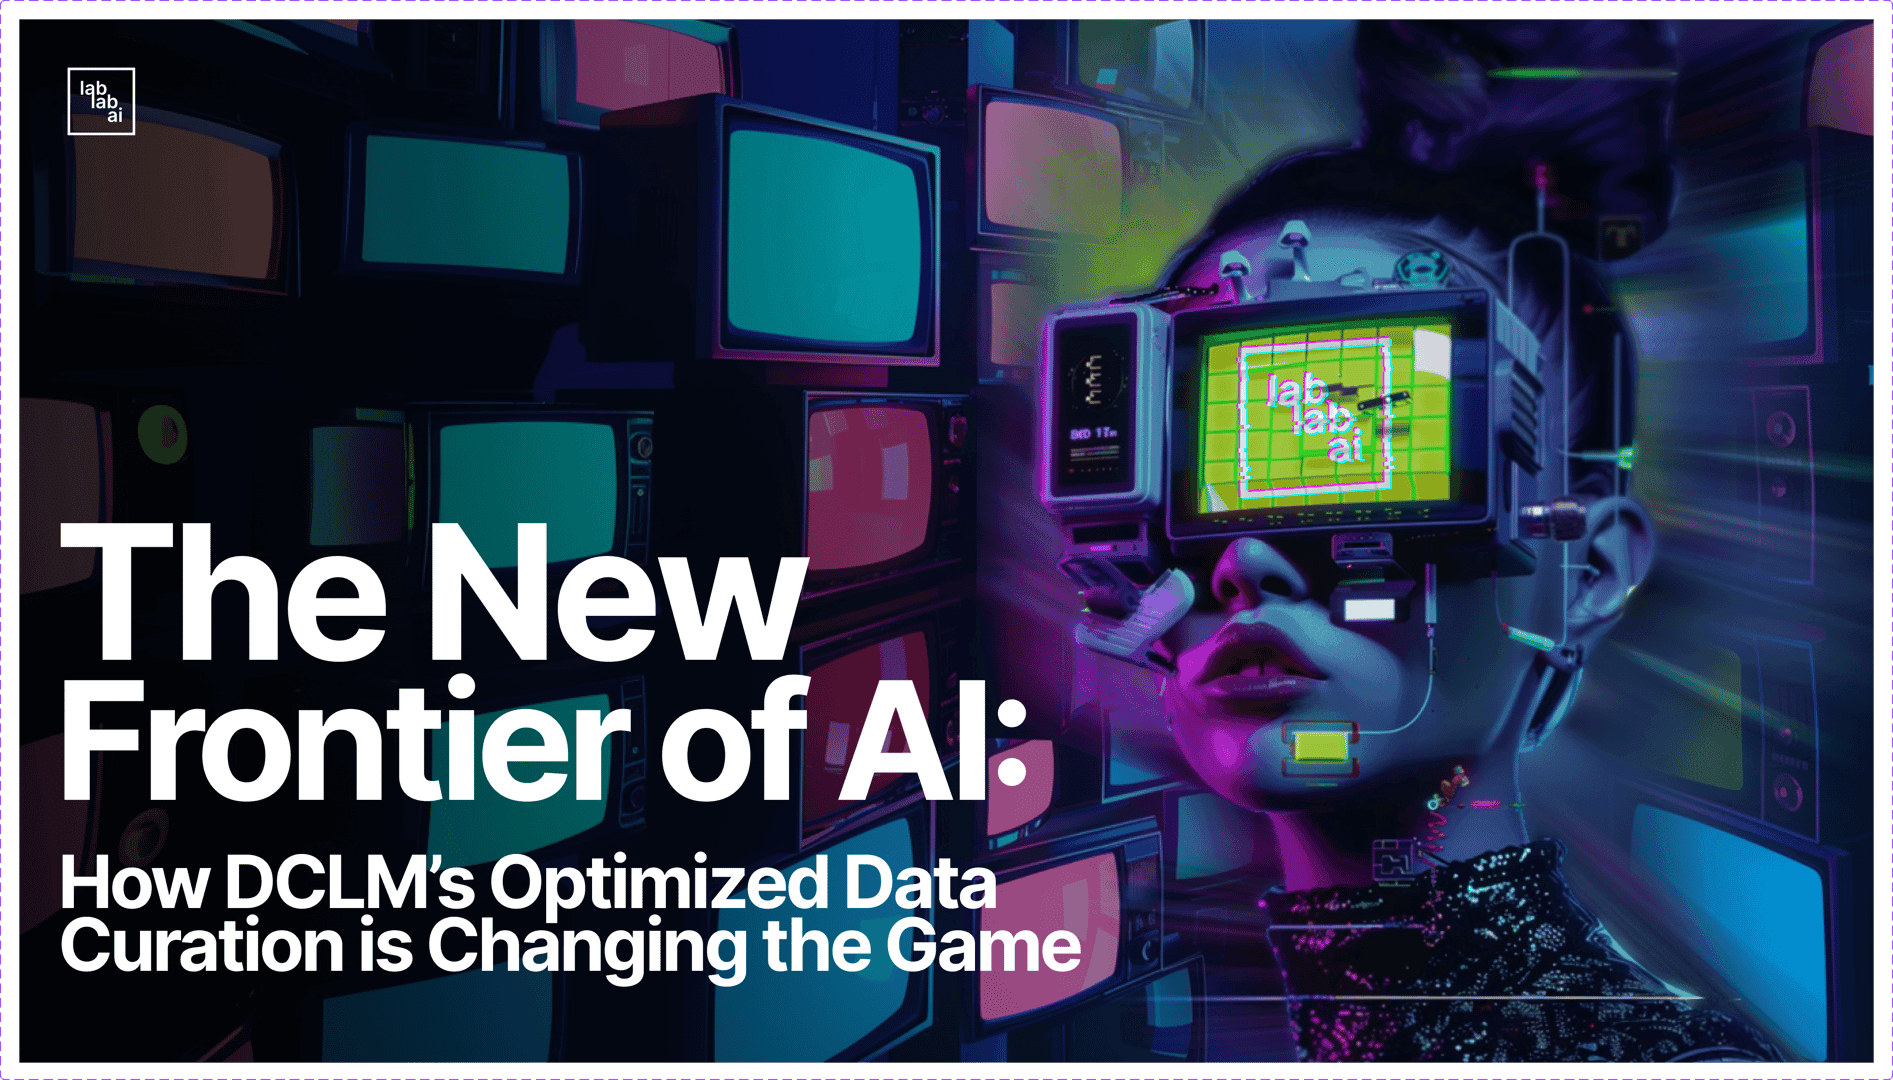 The New Frontier of AI: How DCLM’s Optimized Data Curation is Changing the Game